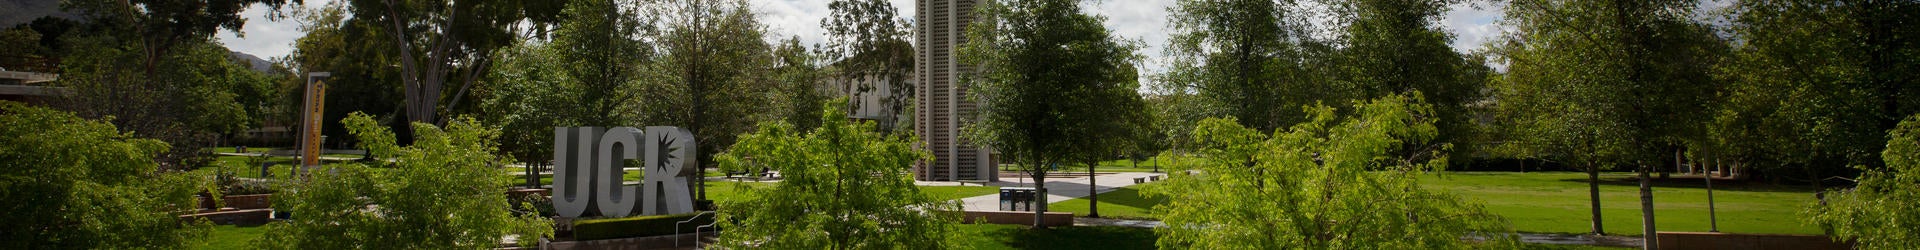 Sunny Campus day with UCR statue and Bell Tower